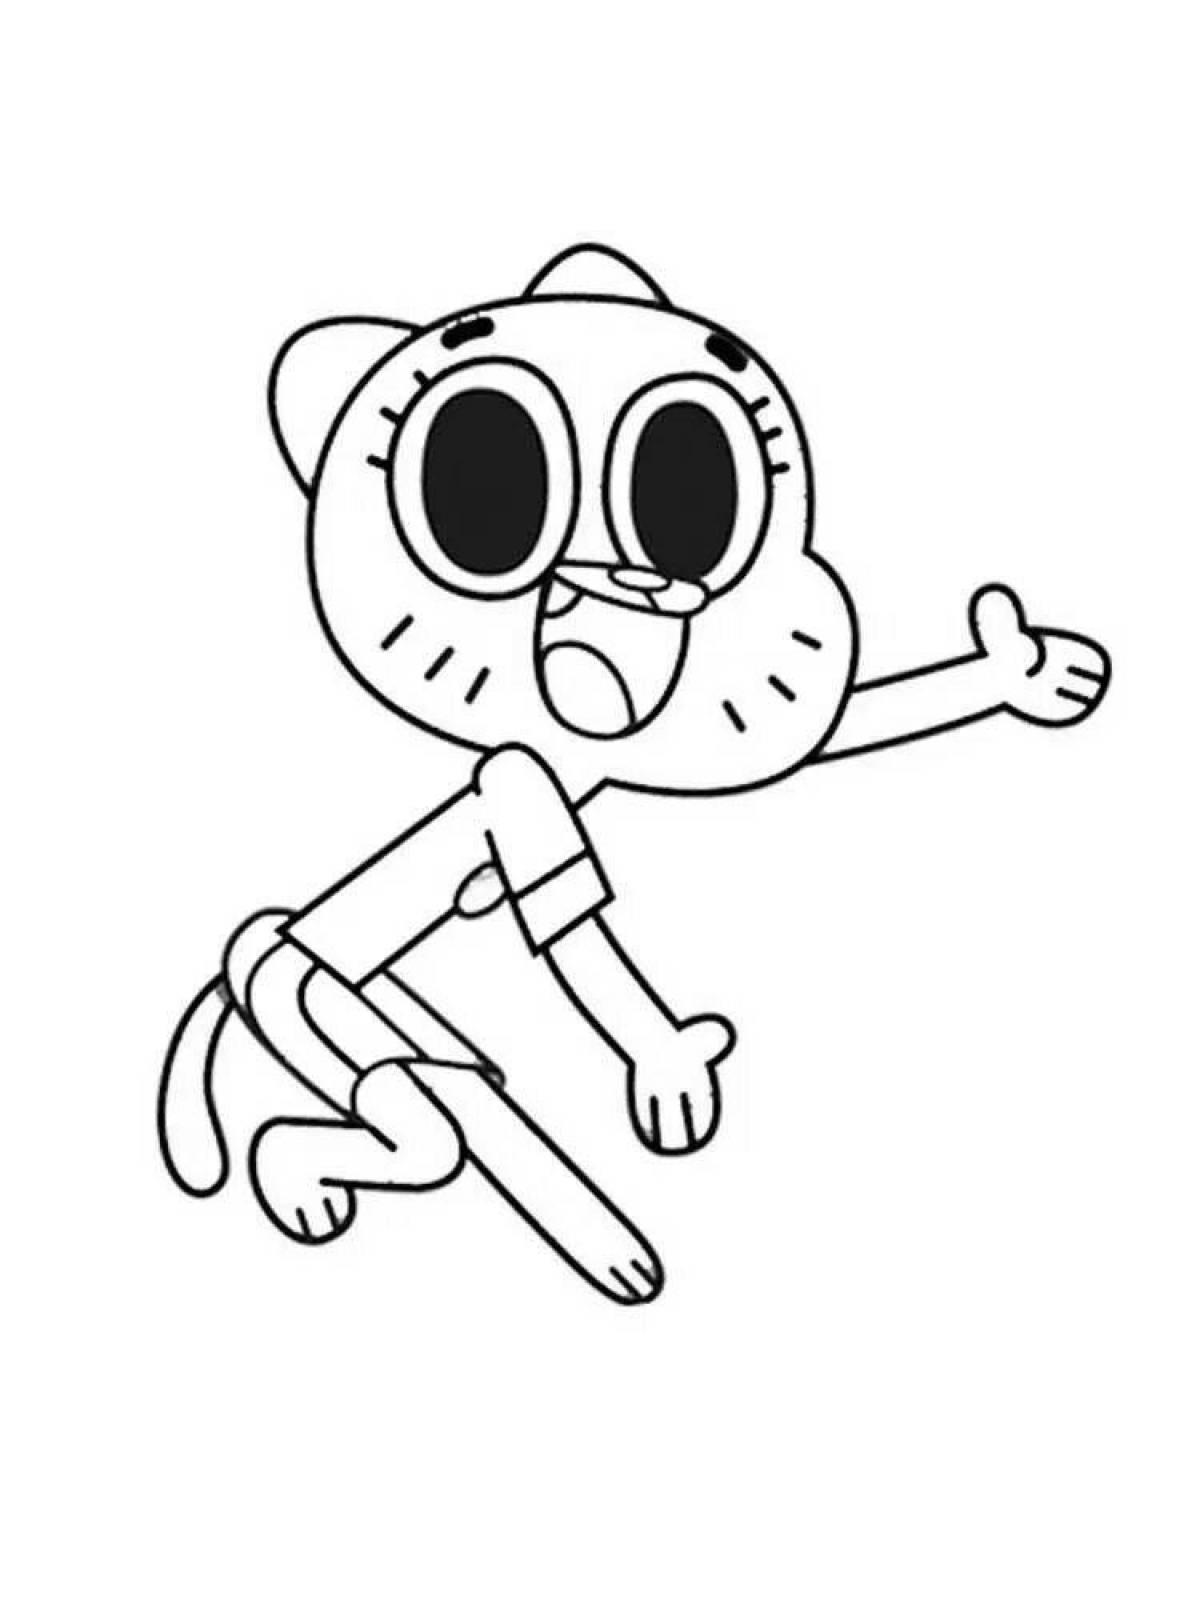 Gumball's colorful coloring page